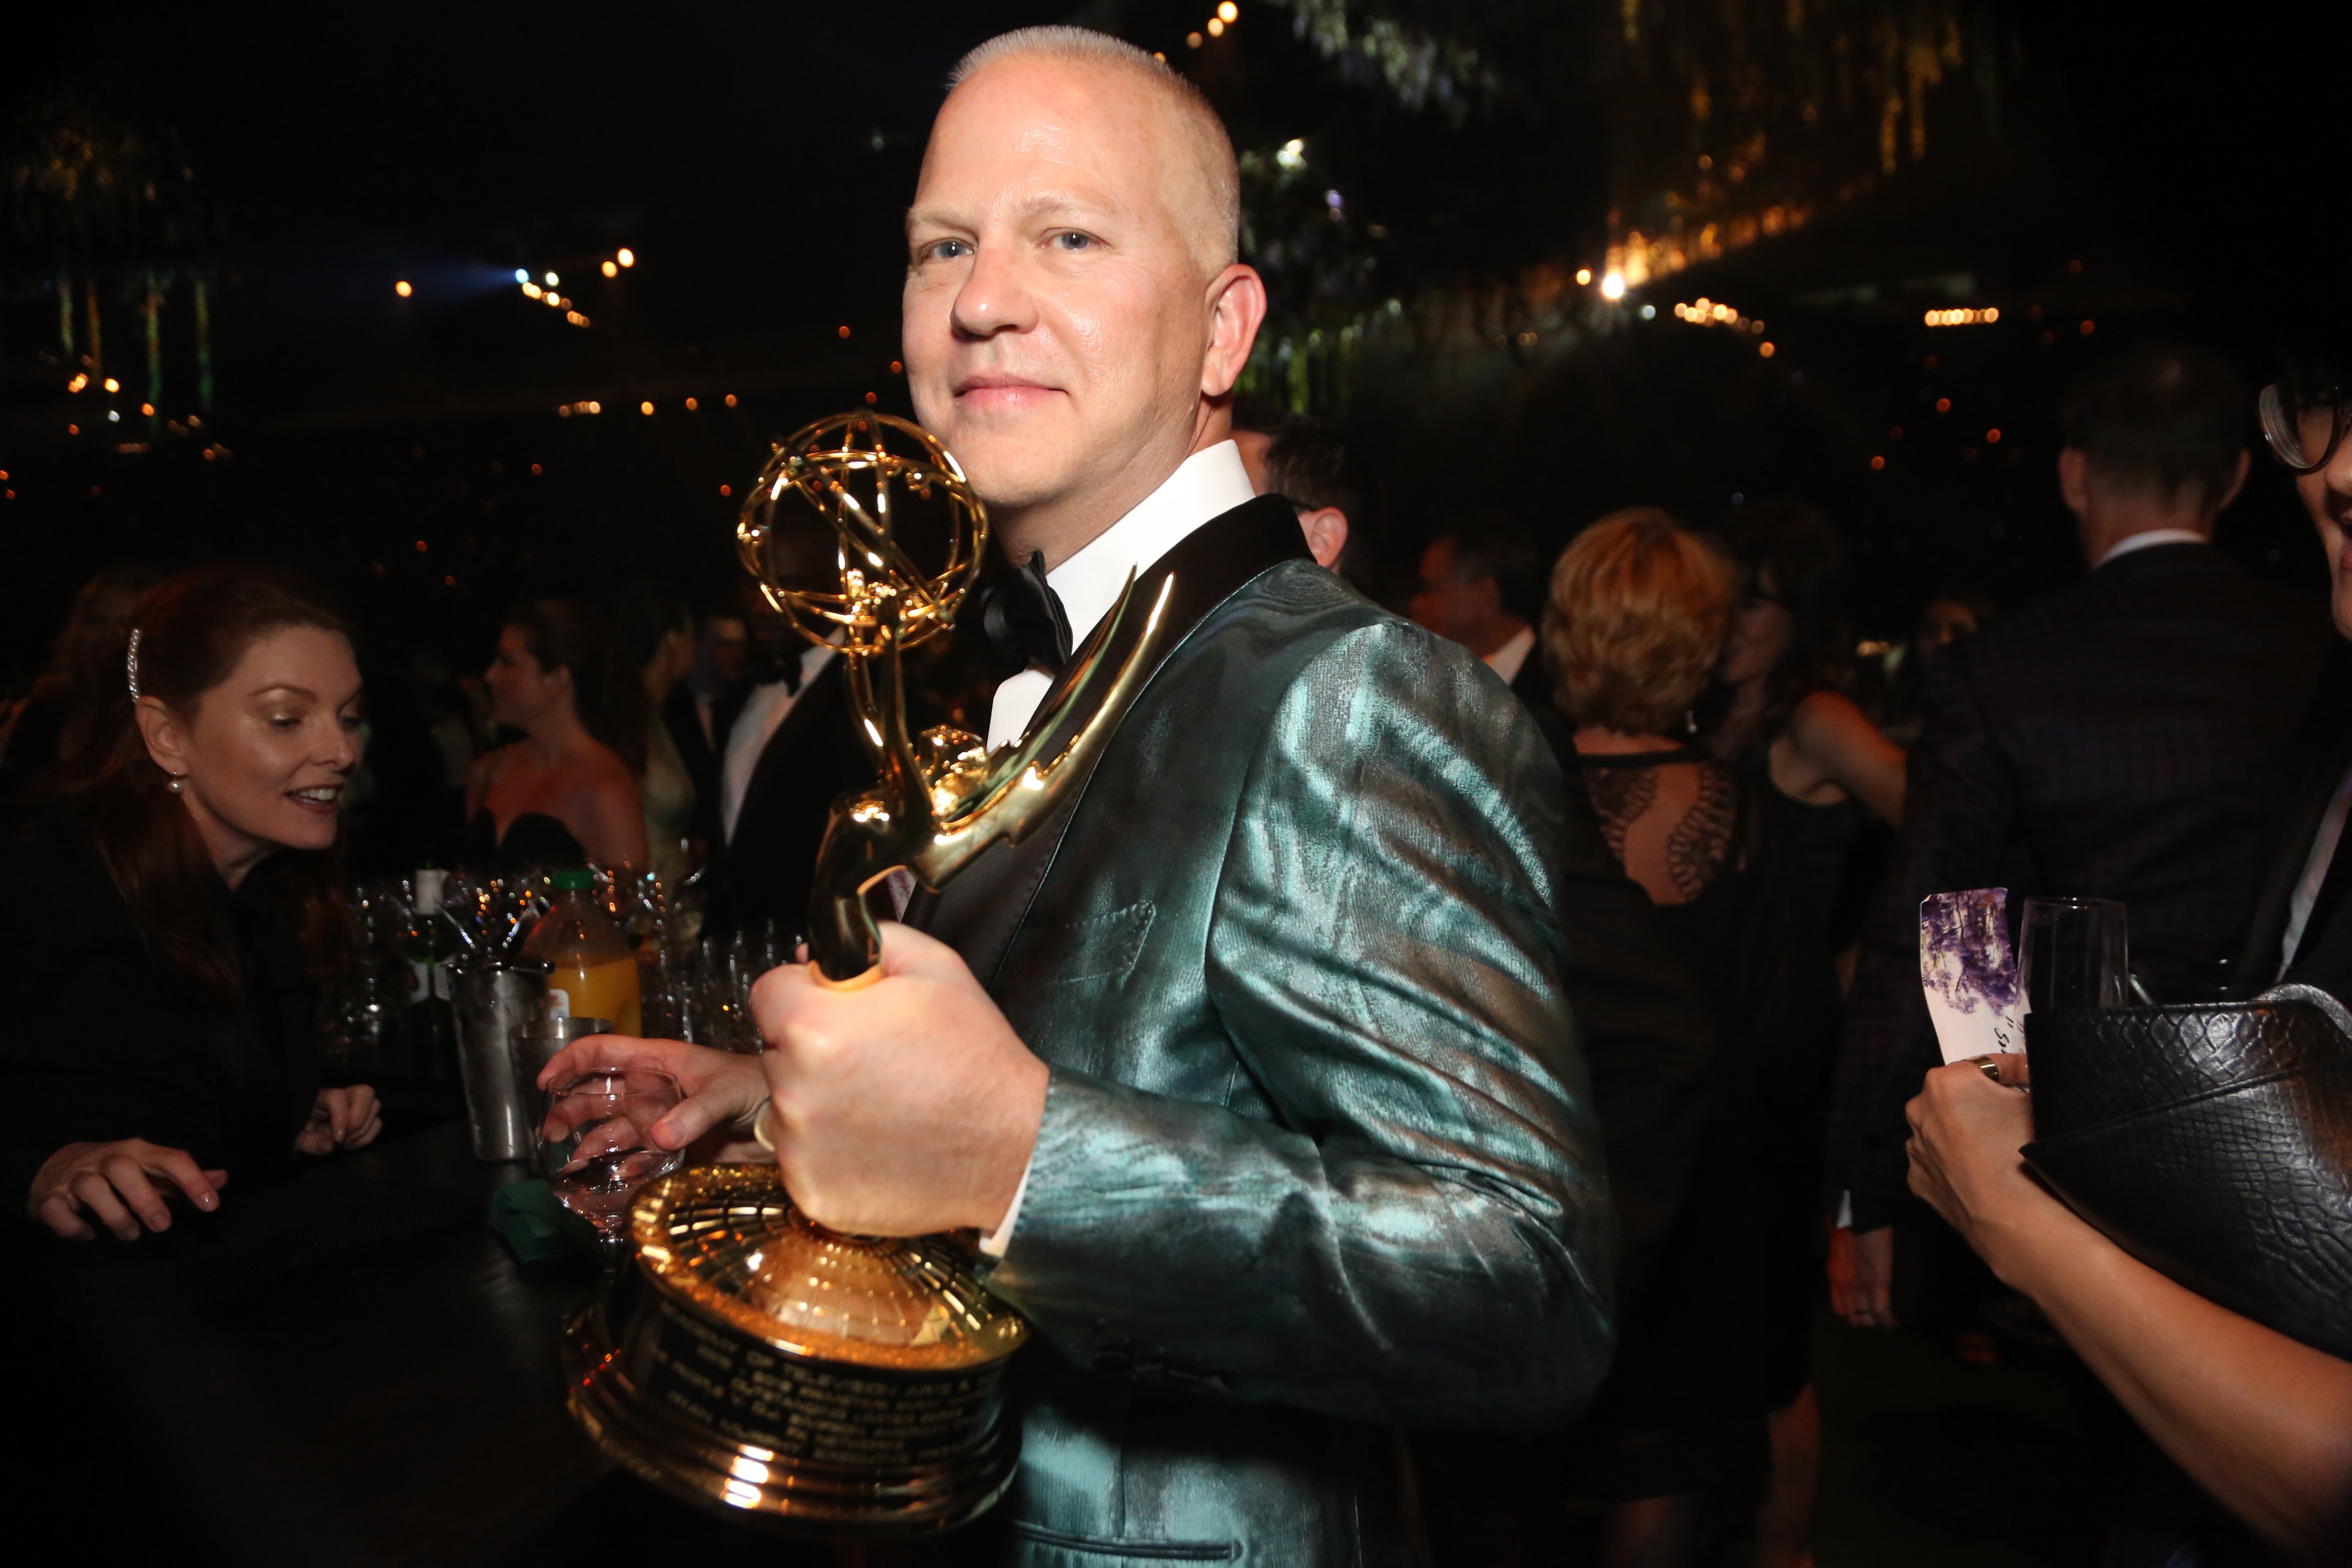 Ryan Murphy at the 68th Primetime Emmy Awards Governors Ball on Sunday, September 18, 2016 (file photo) (Rich Fury—Rich Fury/Invision/AP)